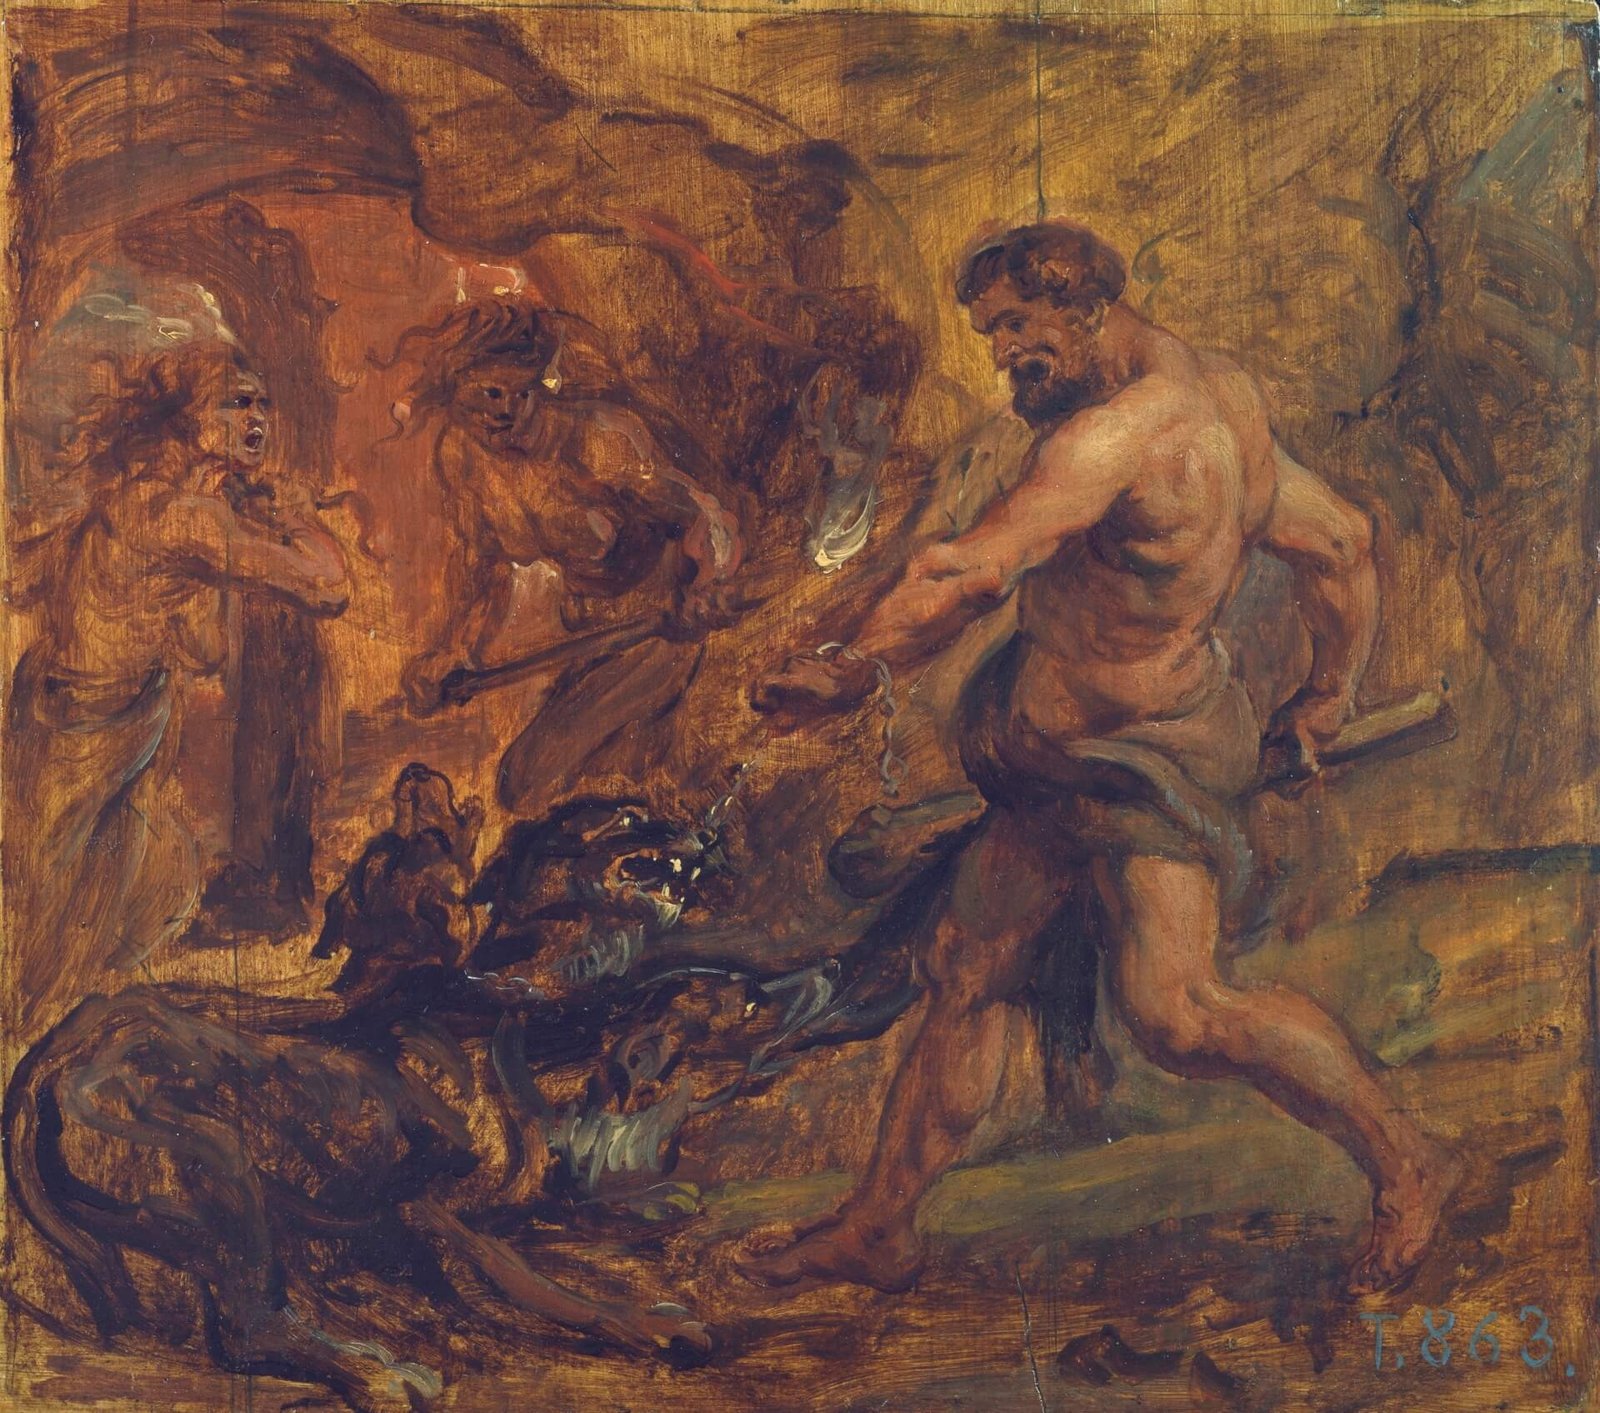 This painting represents Heracles fighting against Cerberus in the kingdom of Hades.